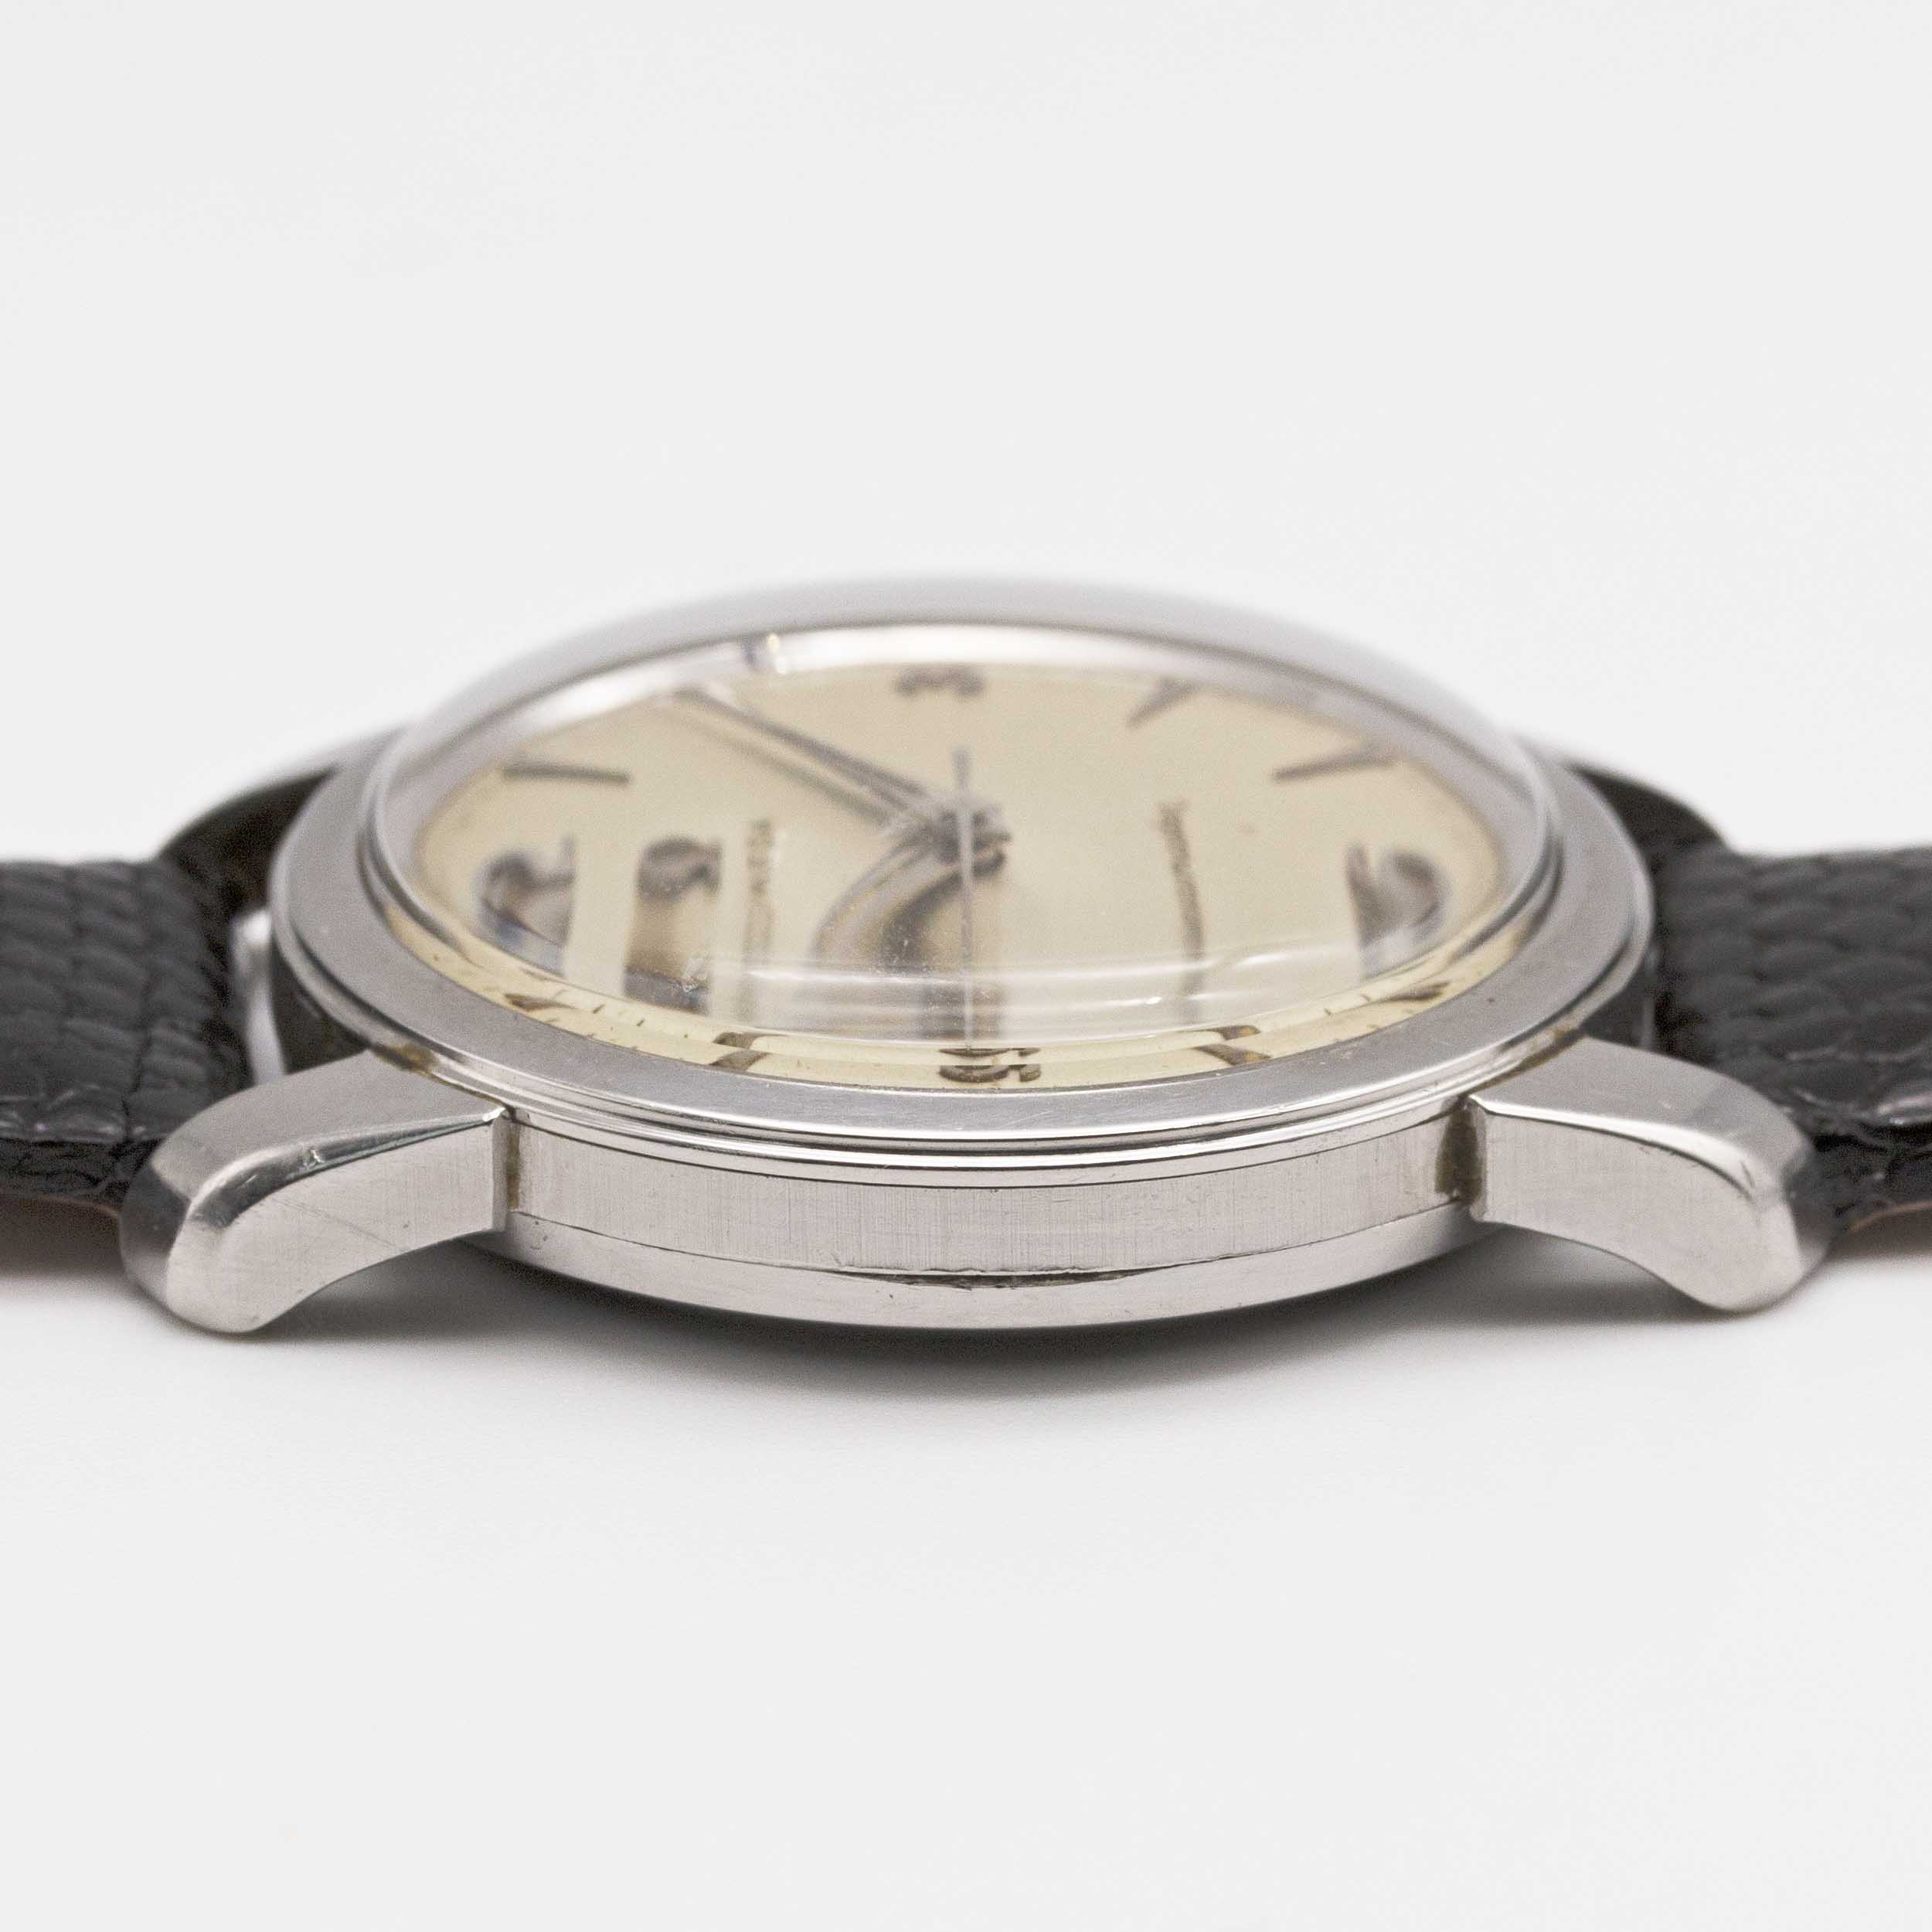 A GENTLEMAN'S STAINLESS STEEL OMEGA SEAMASTER WRIST WATCH  CIRCA 1954, WITH QUARTERLY ARABIC - Image 9 of 11